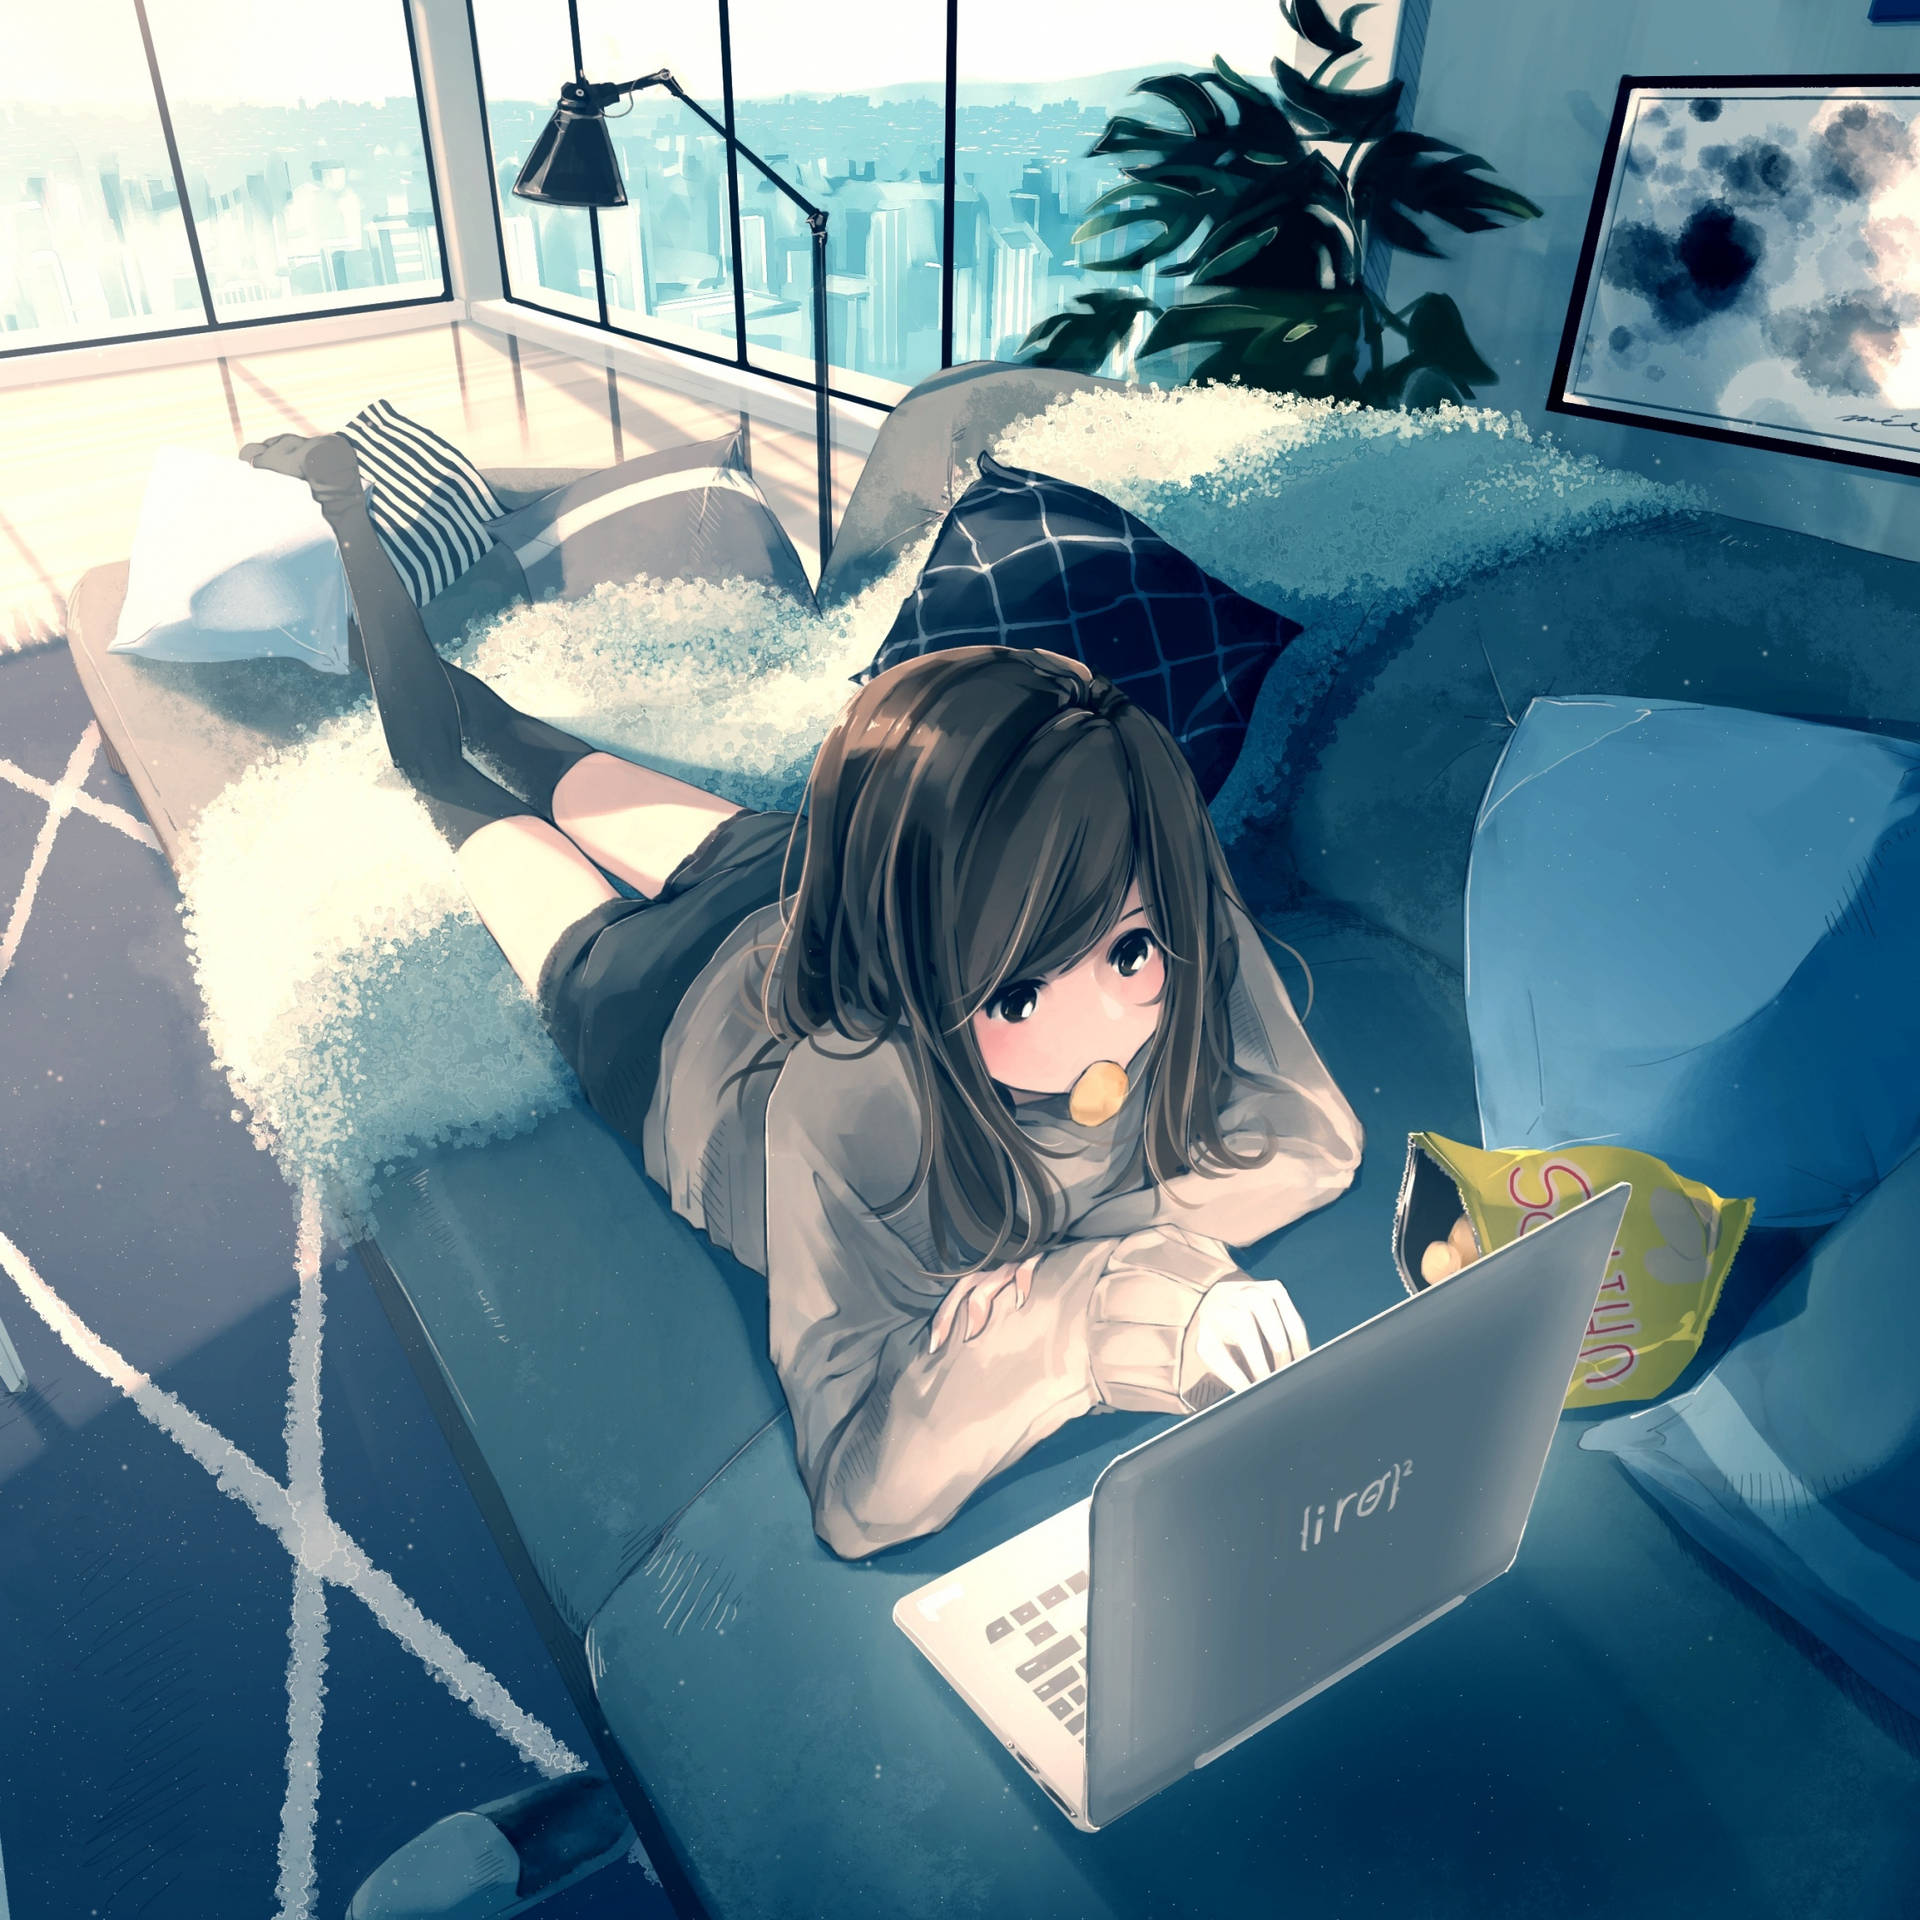 Anime Girl Lies Down Working On Her Laptop Wallpaper